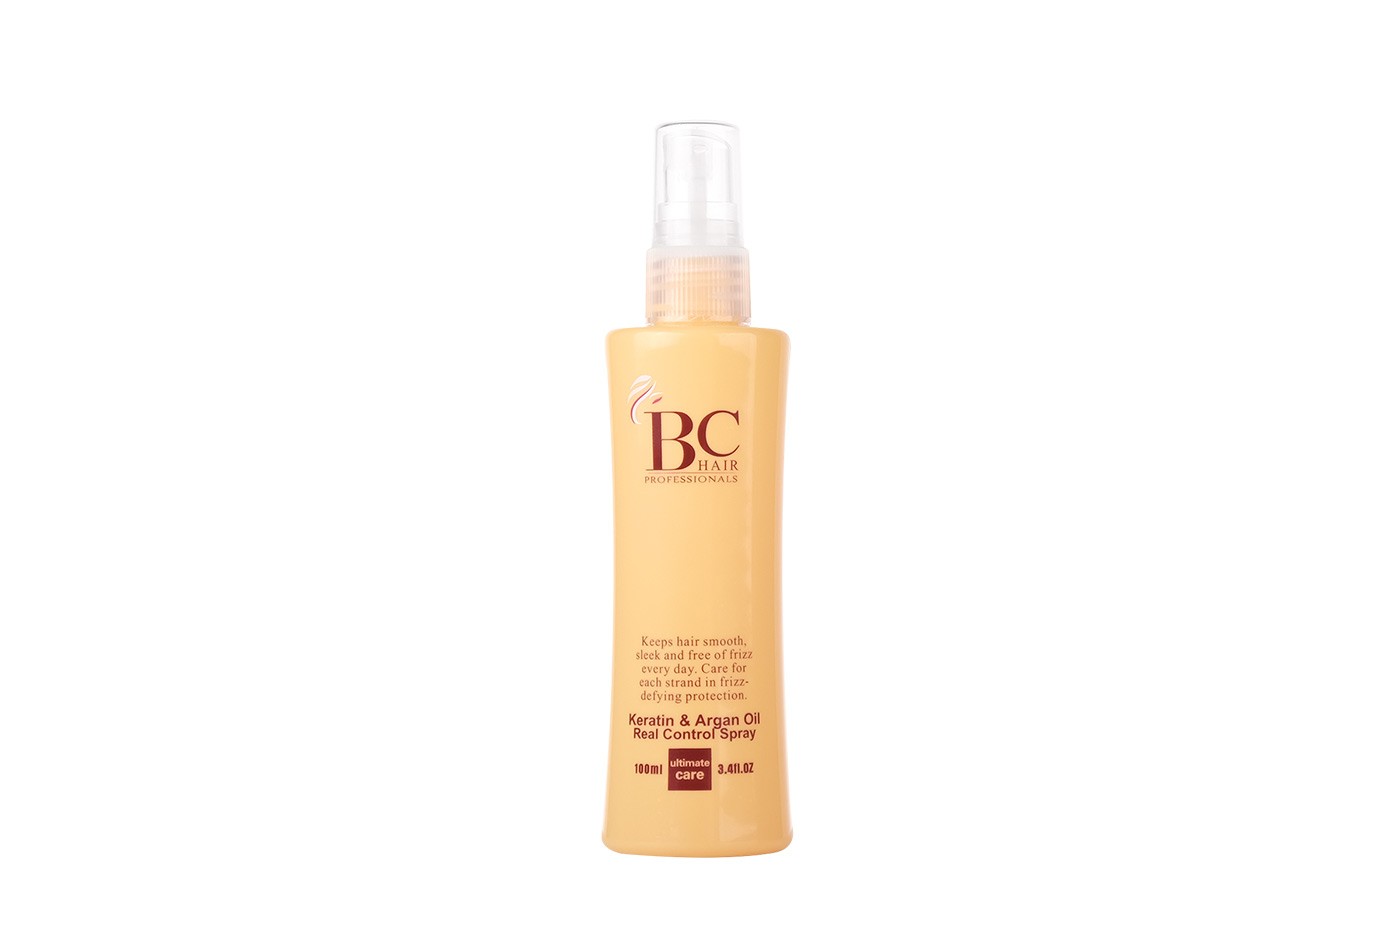 Get smooth and manageable hair with BC Hair Professionals Hair Spray